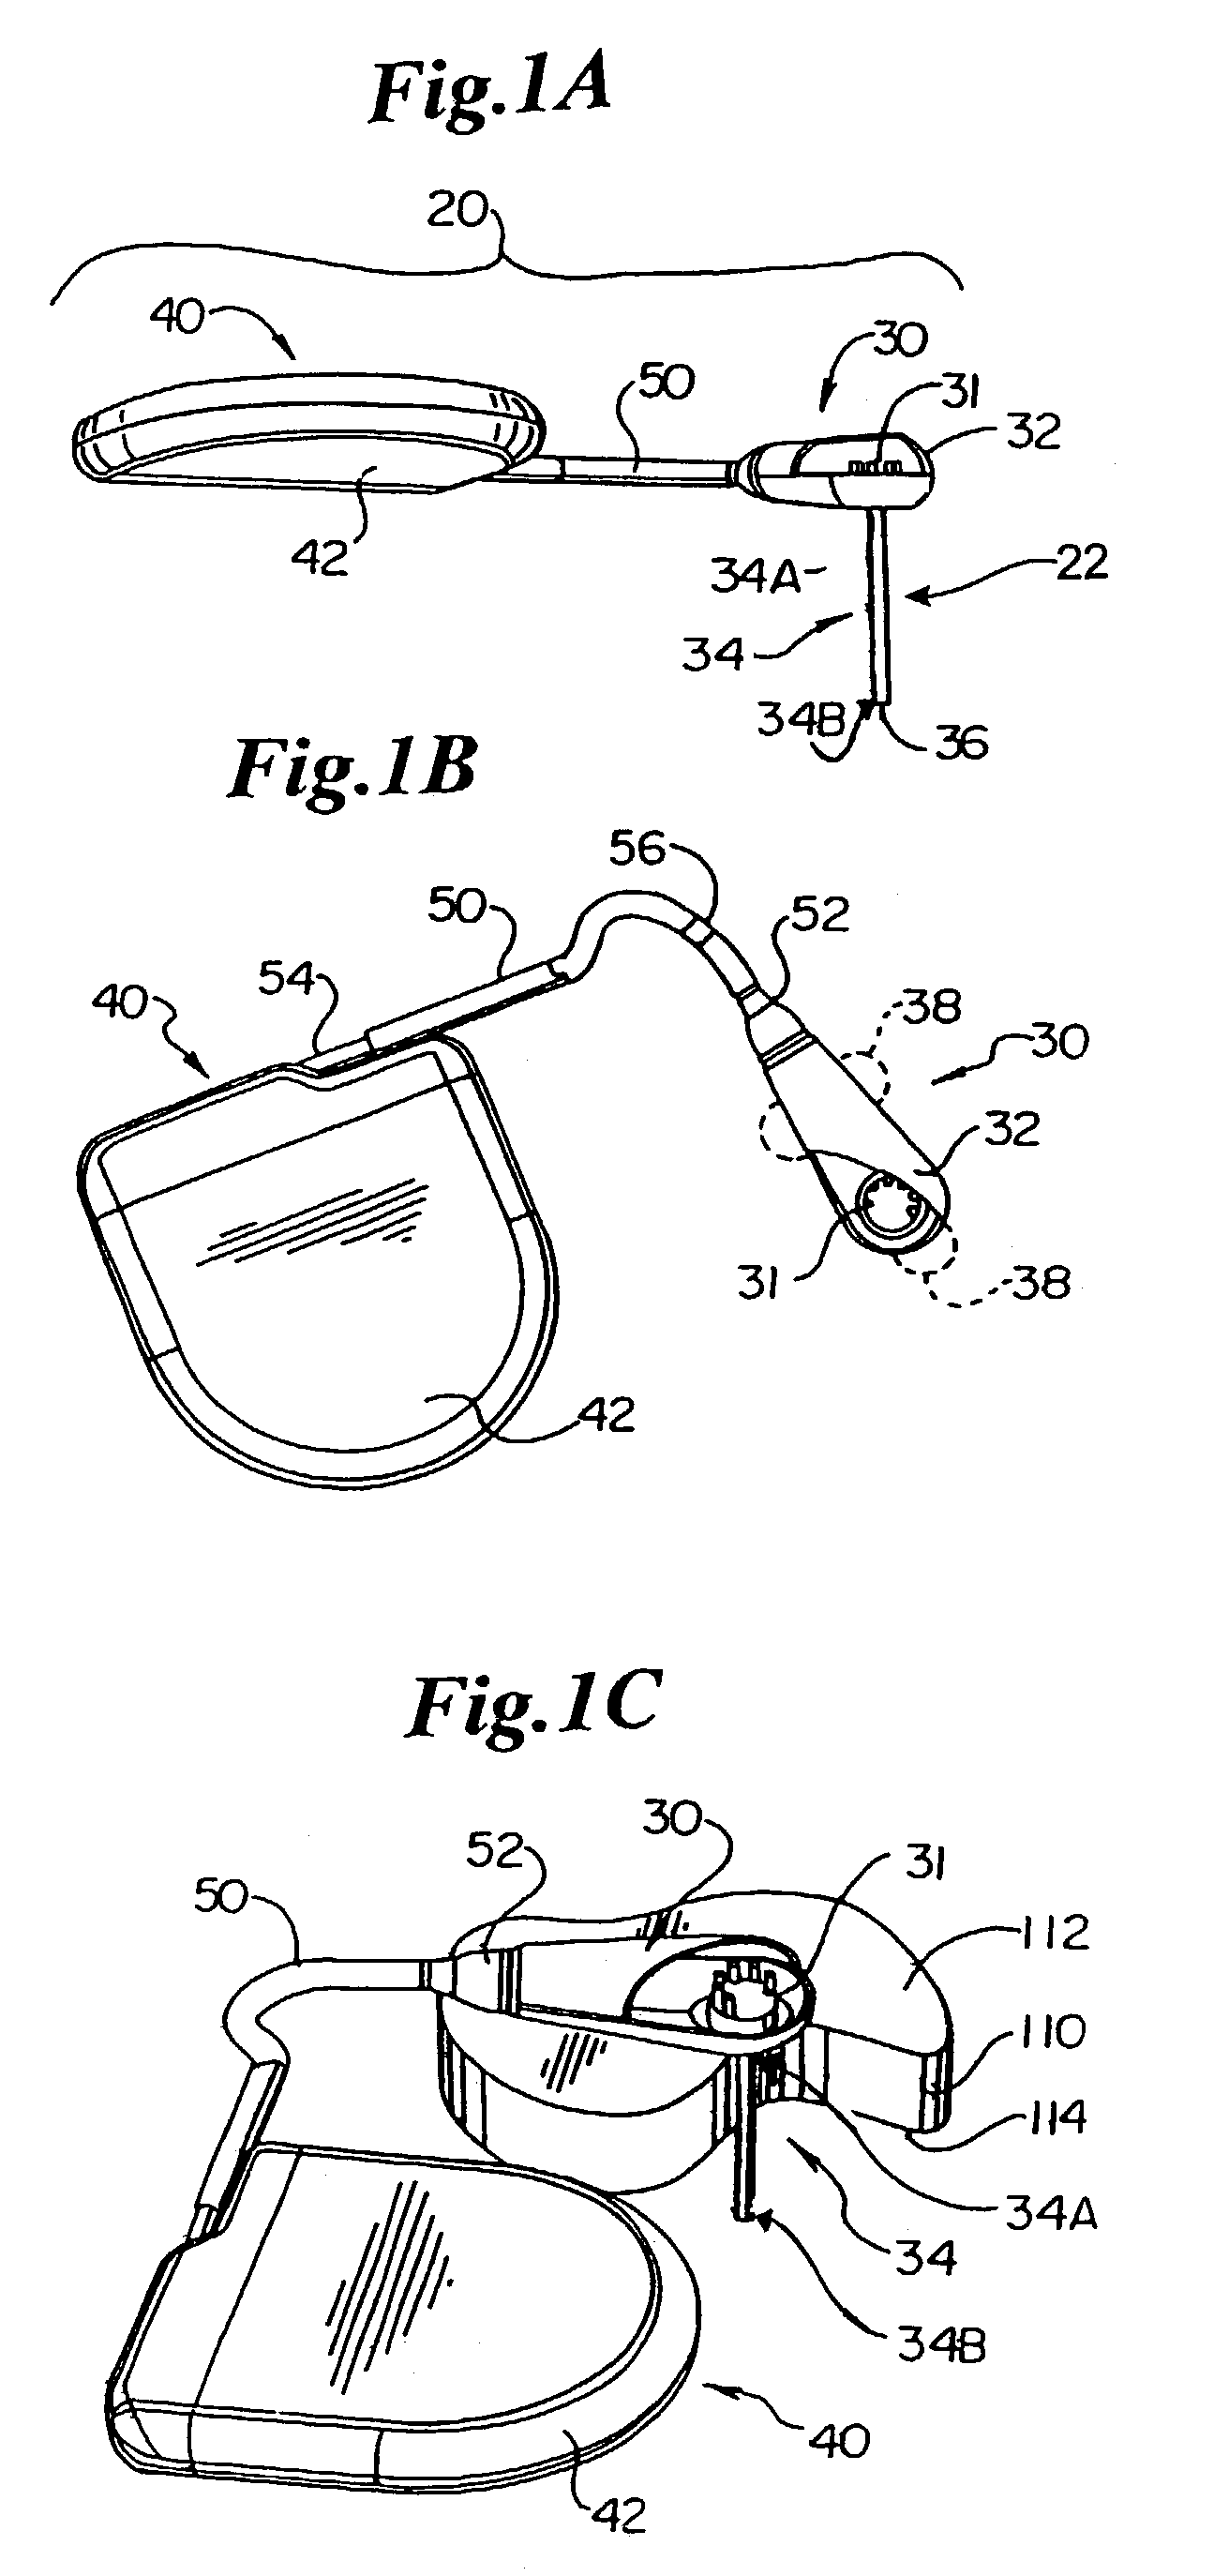 Barriers and methods for pressure measurement catheters